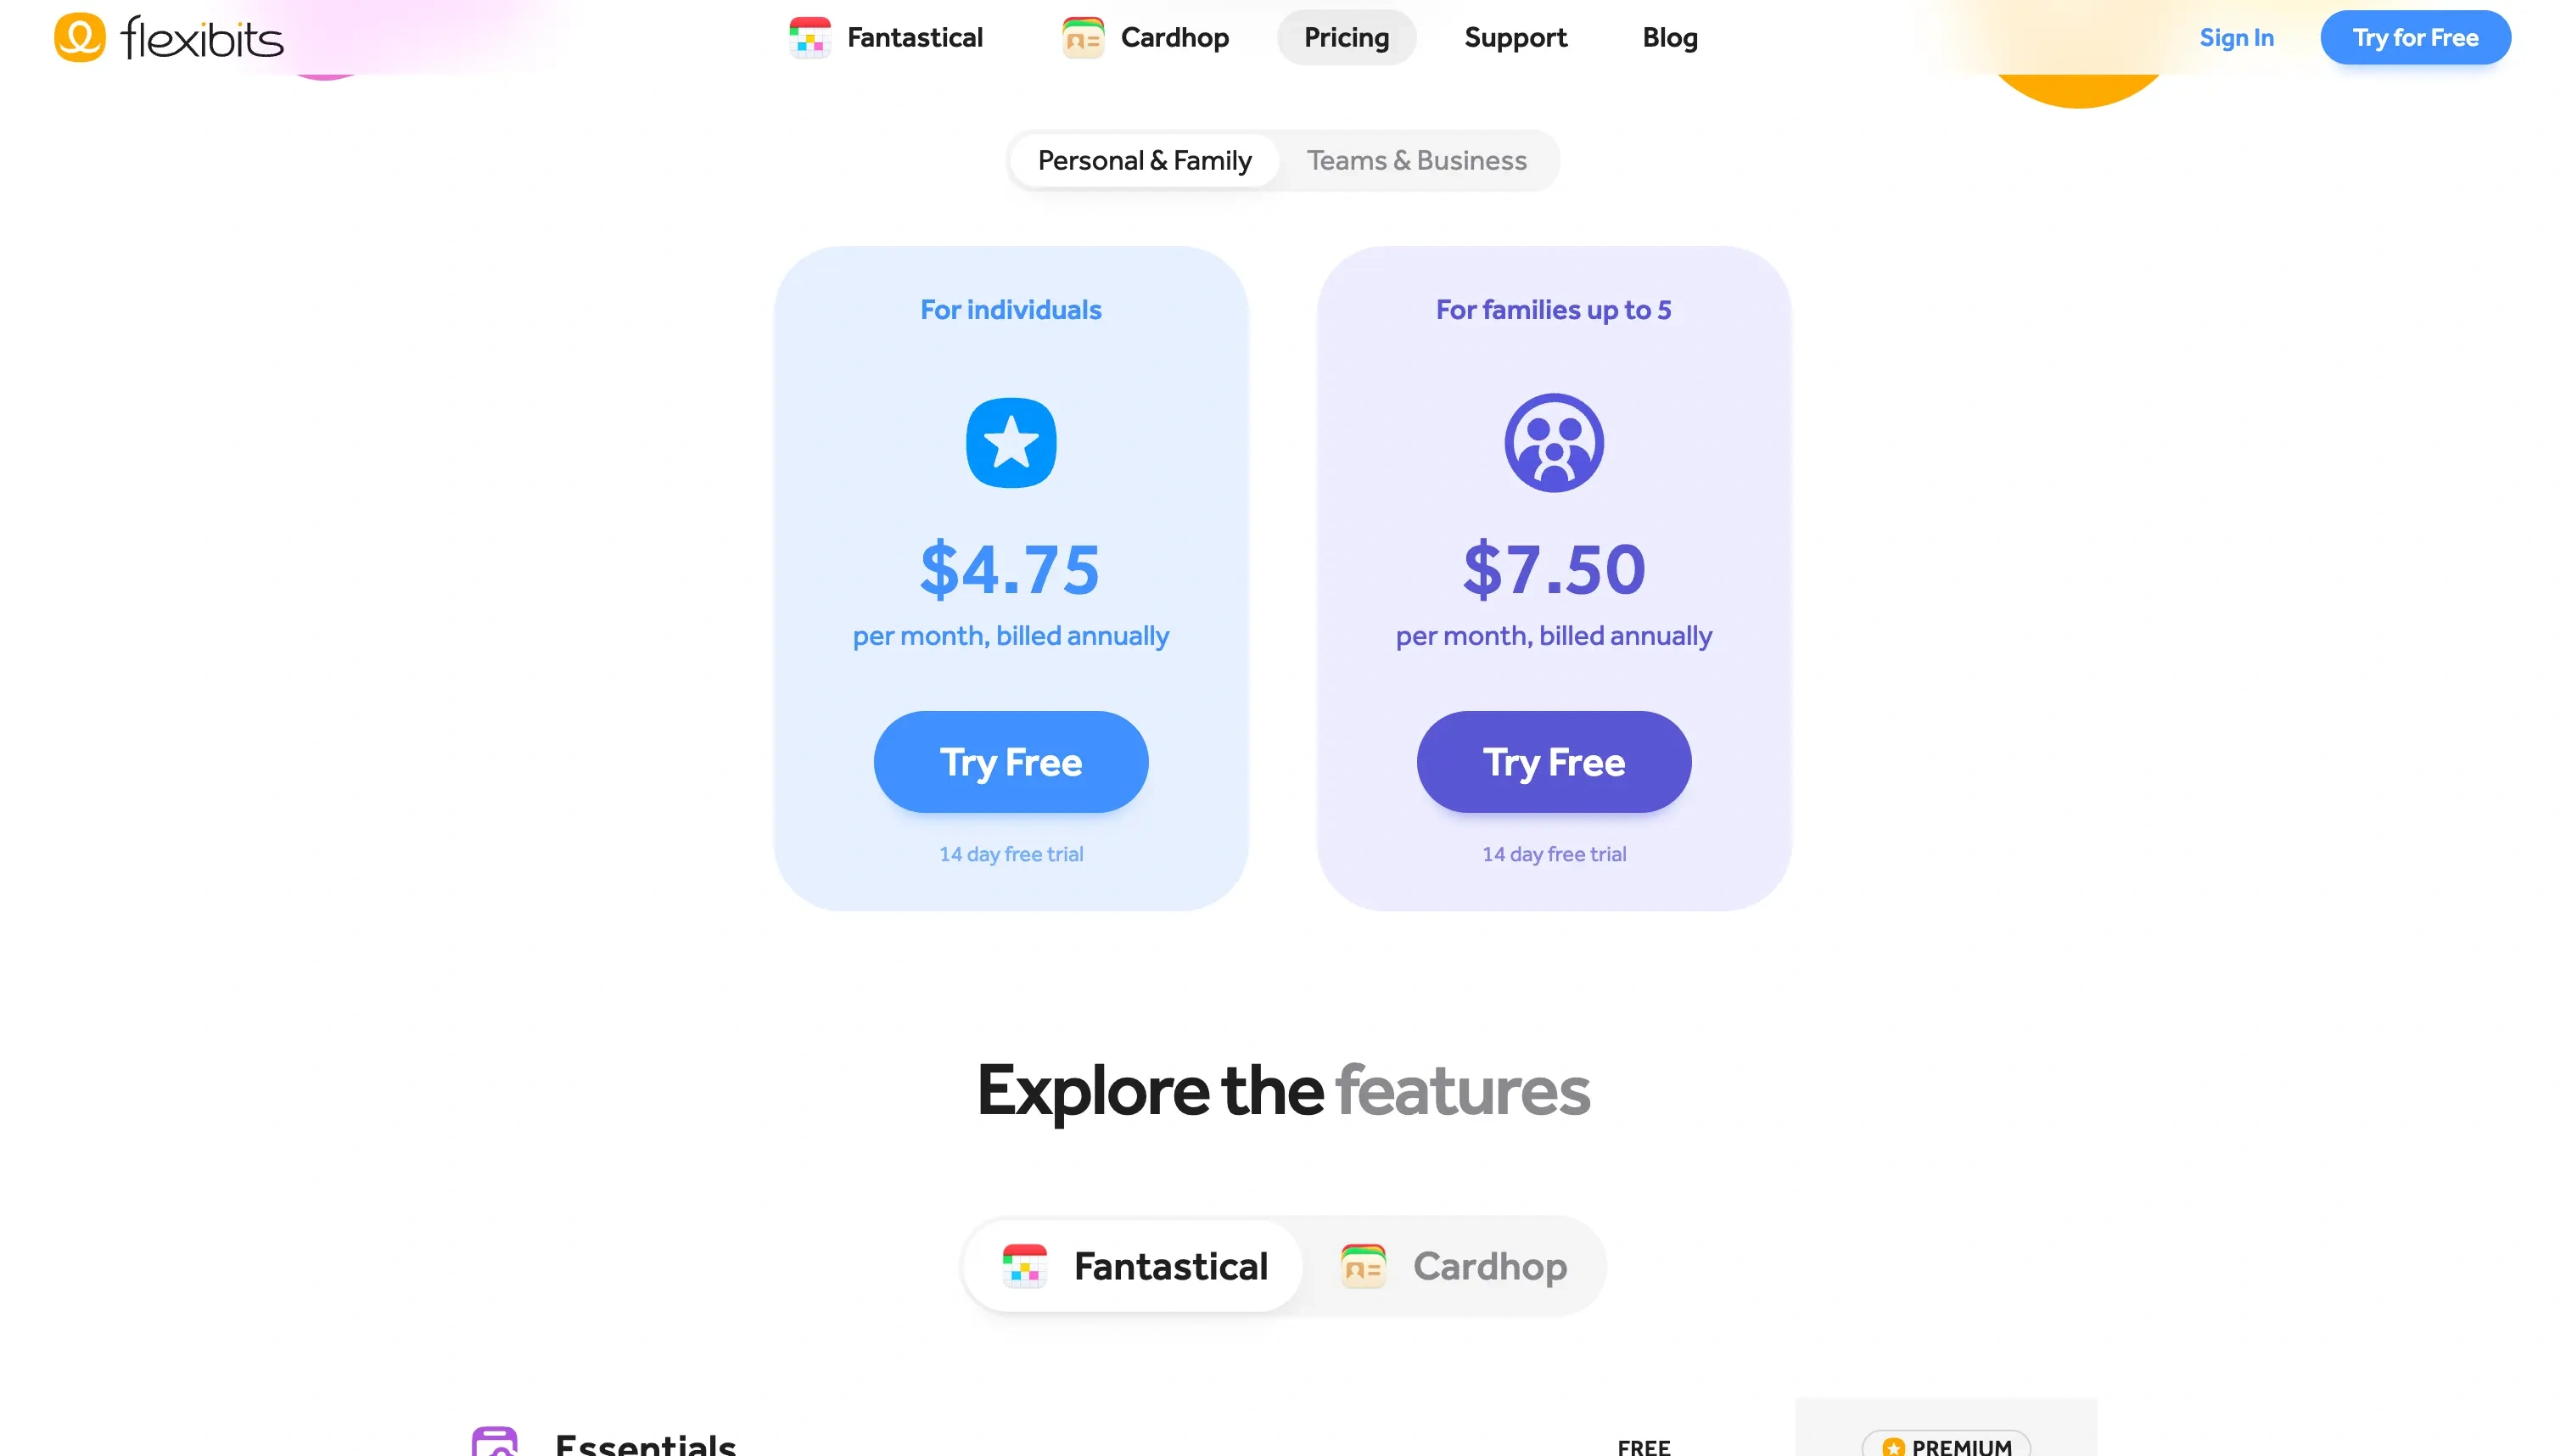 The fantastical pricing page